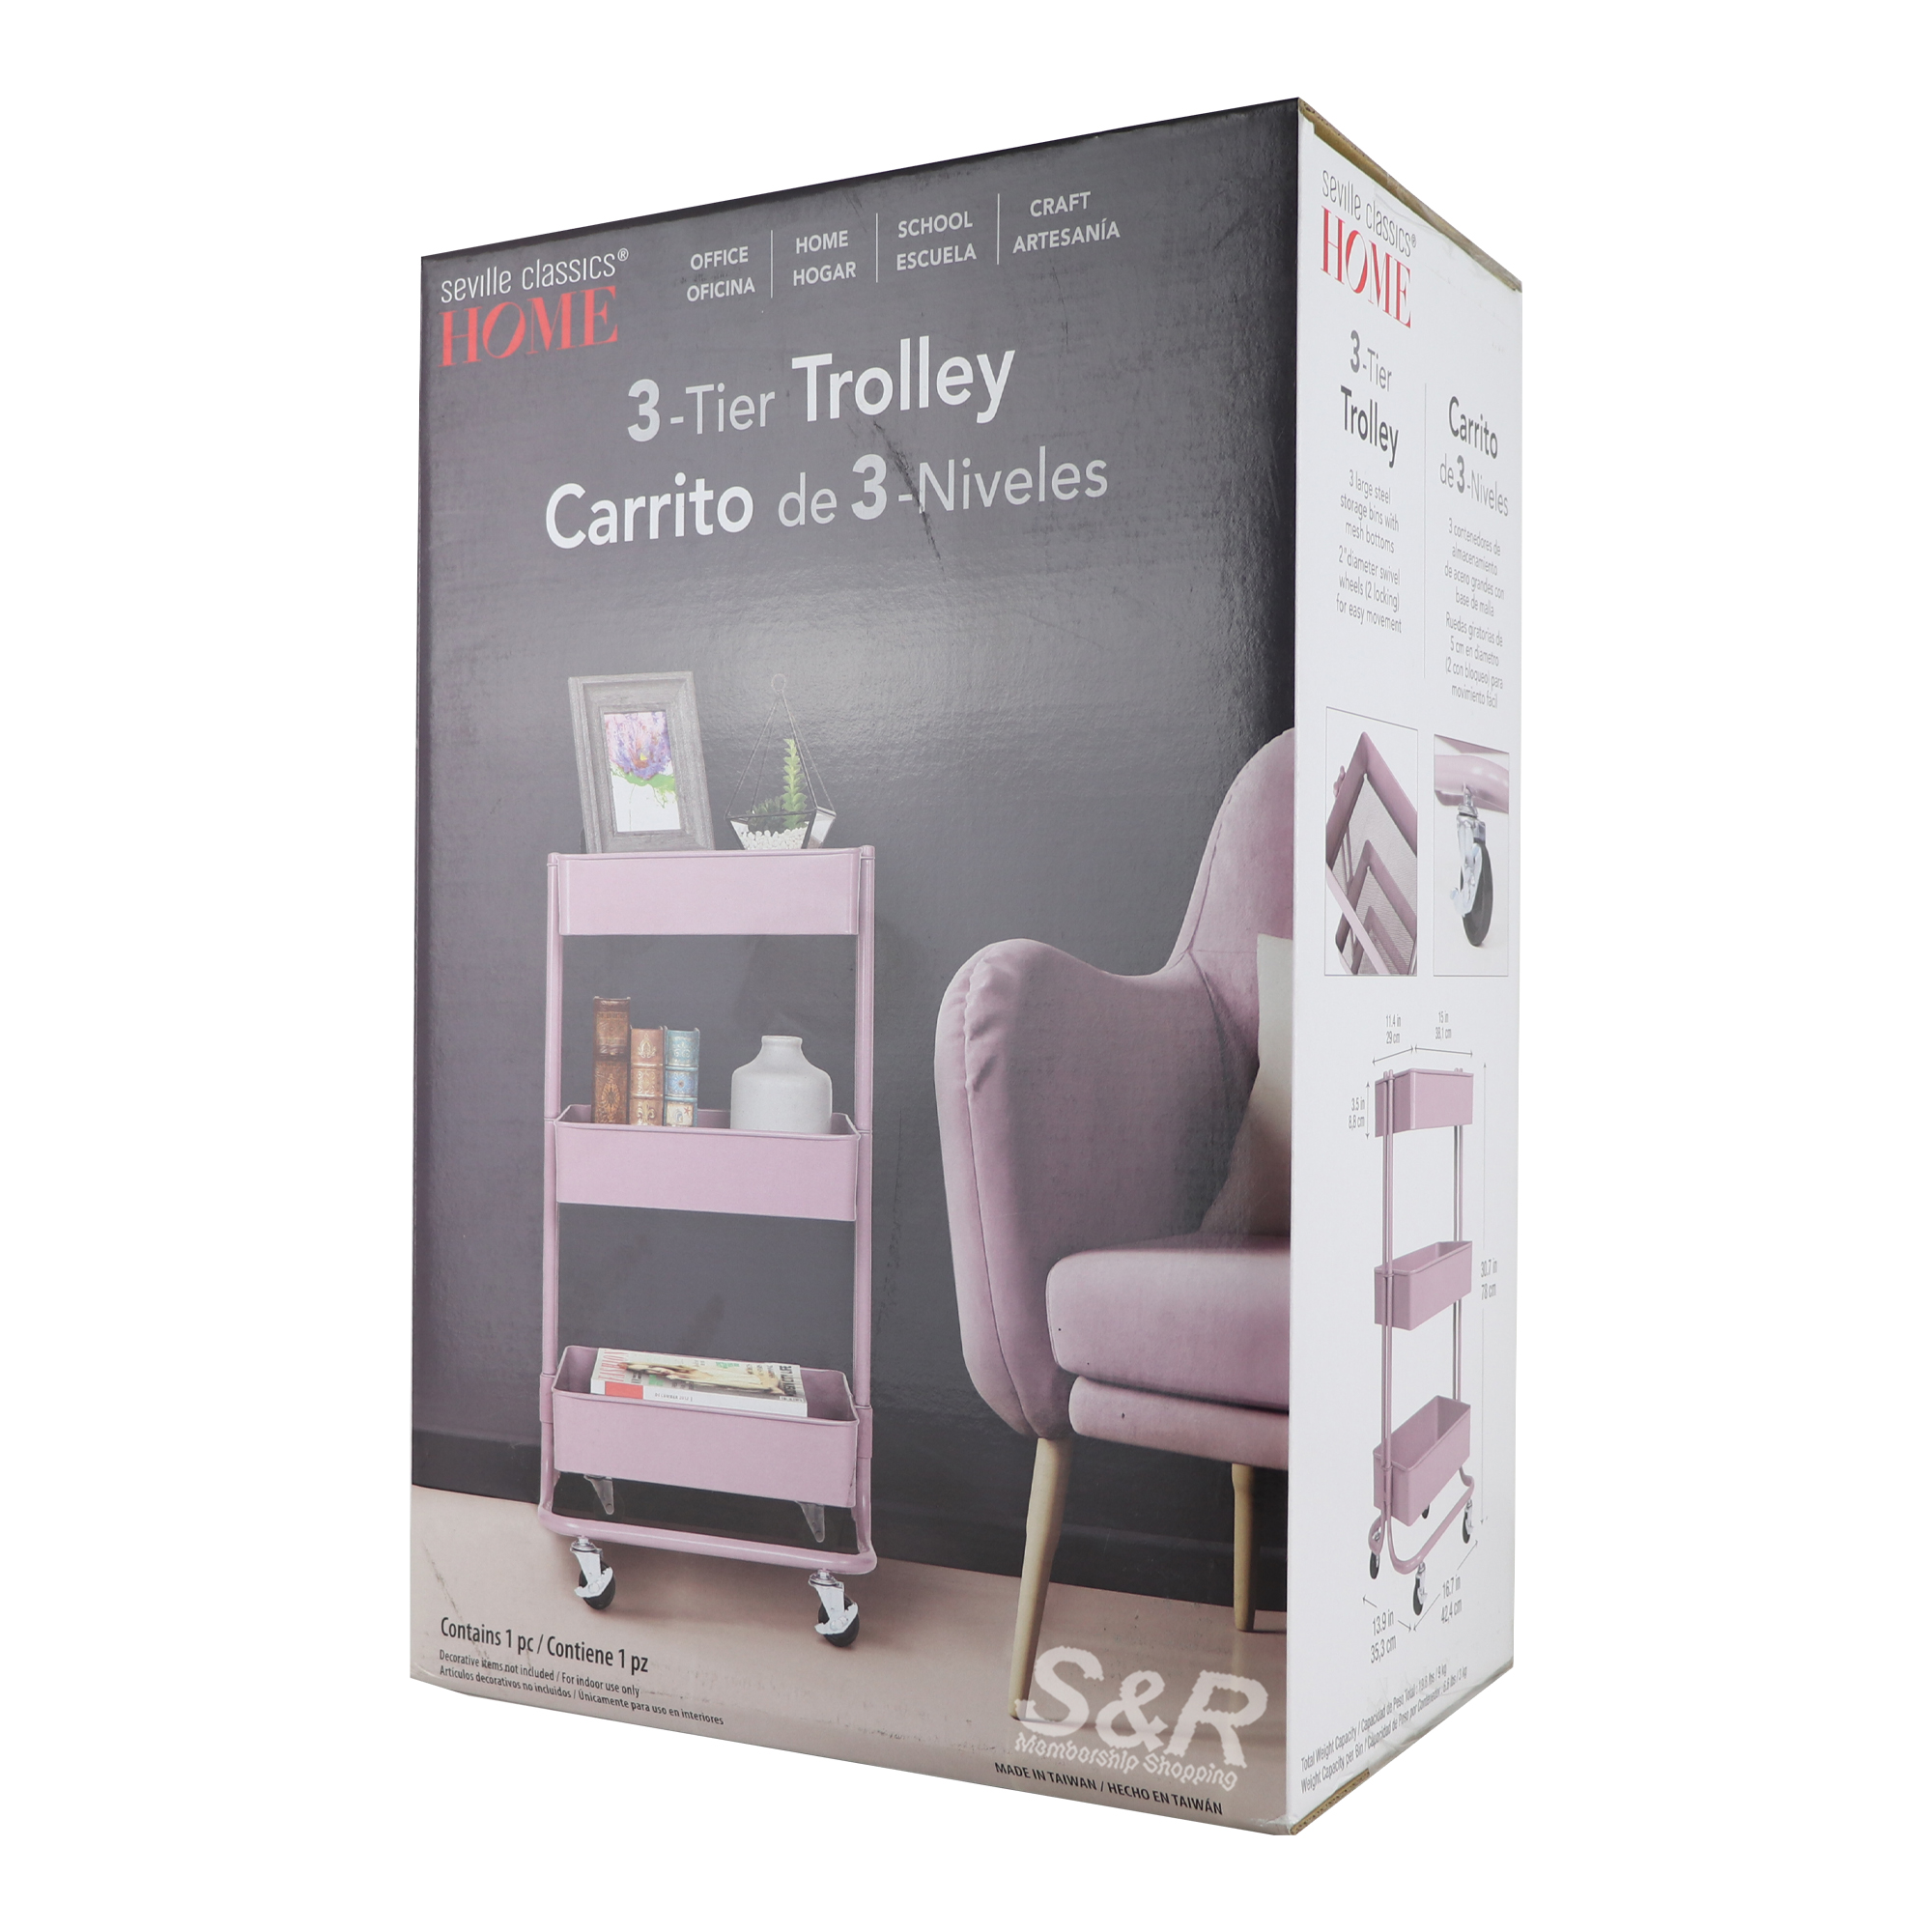 Seville Classics Home 3-Tier Trolley Pastel Pink